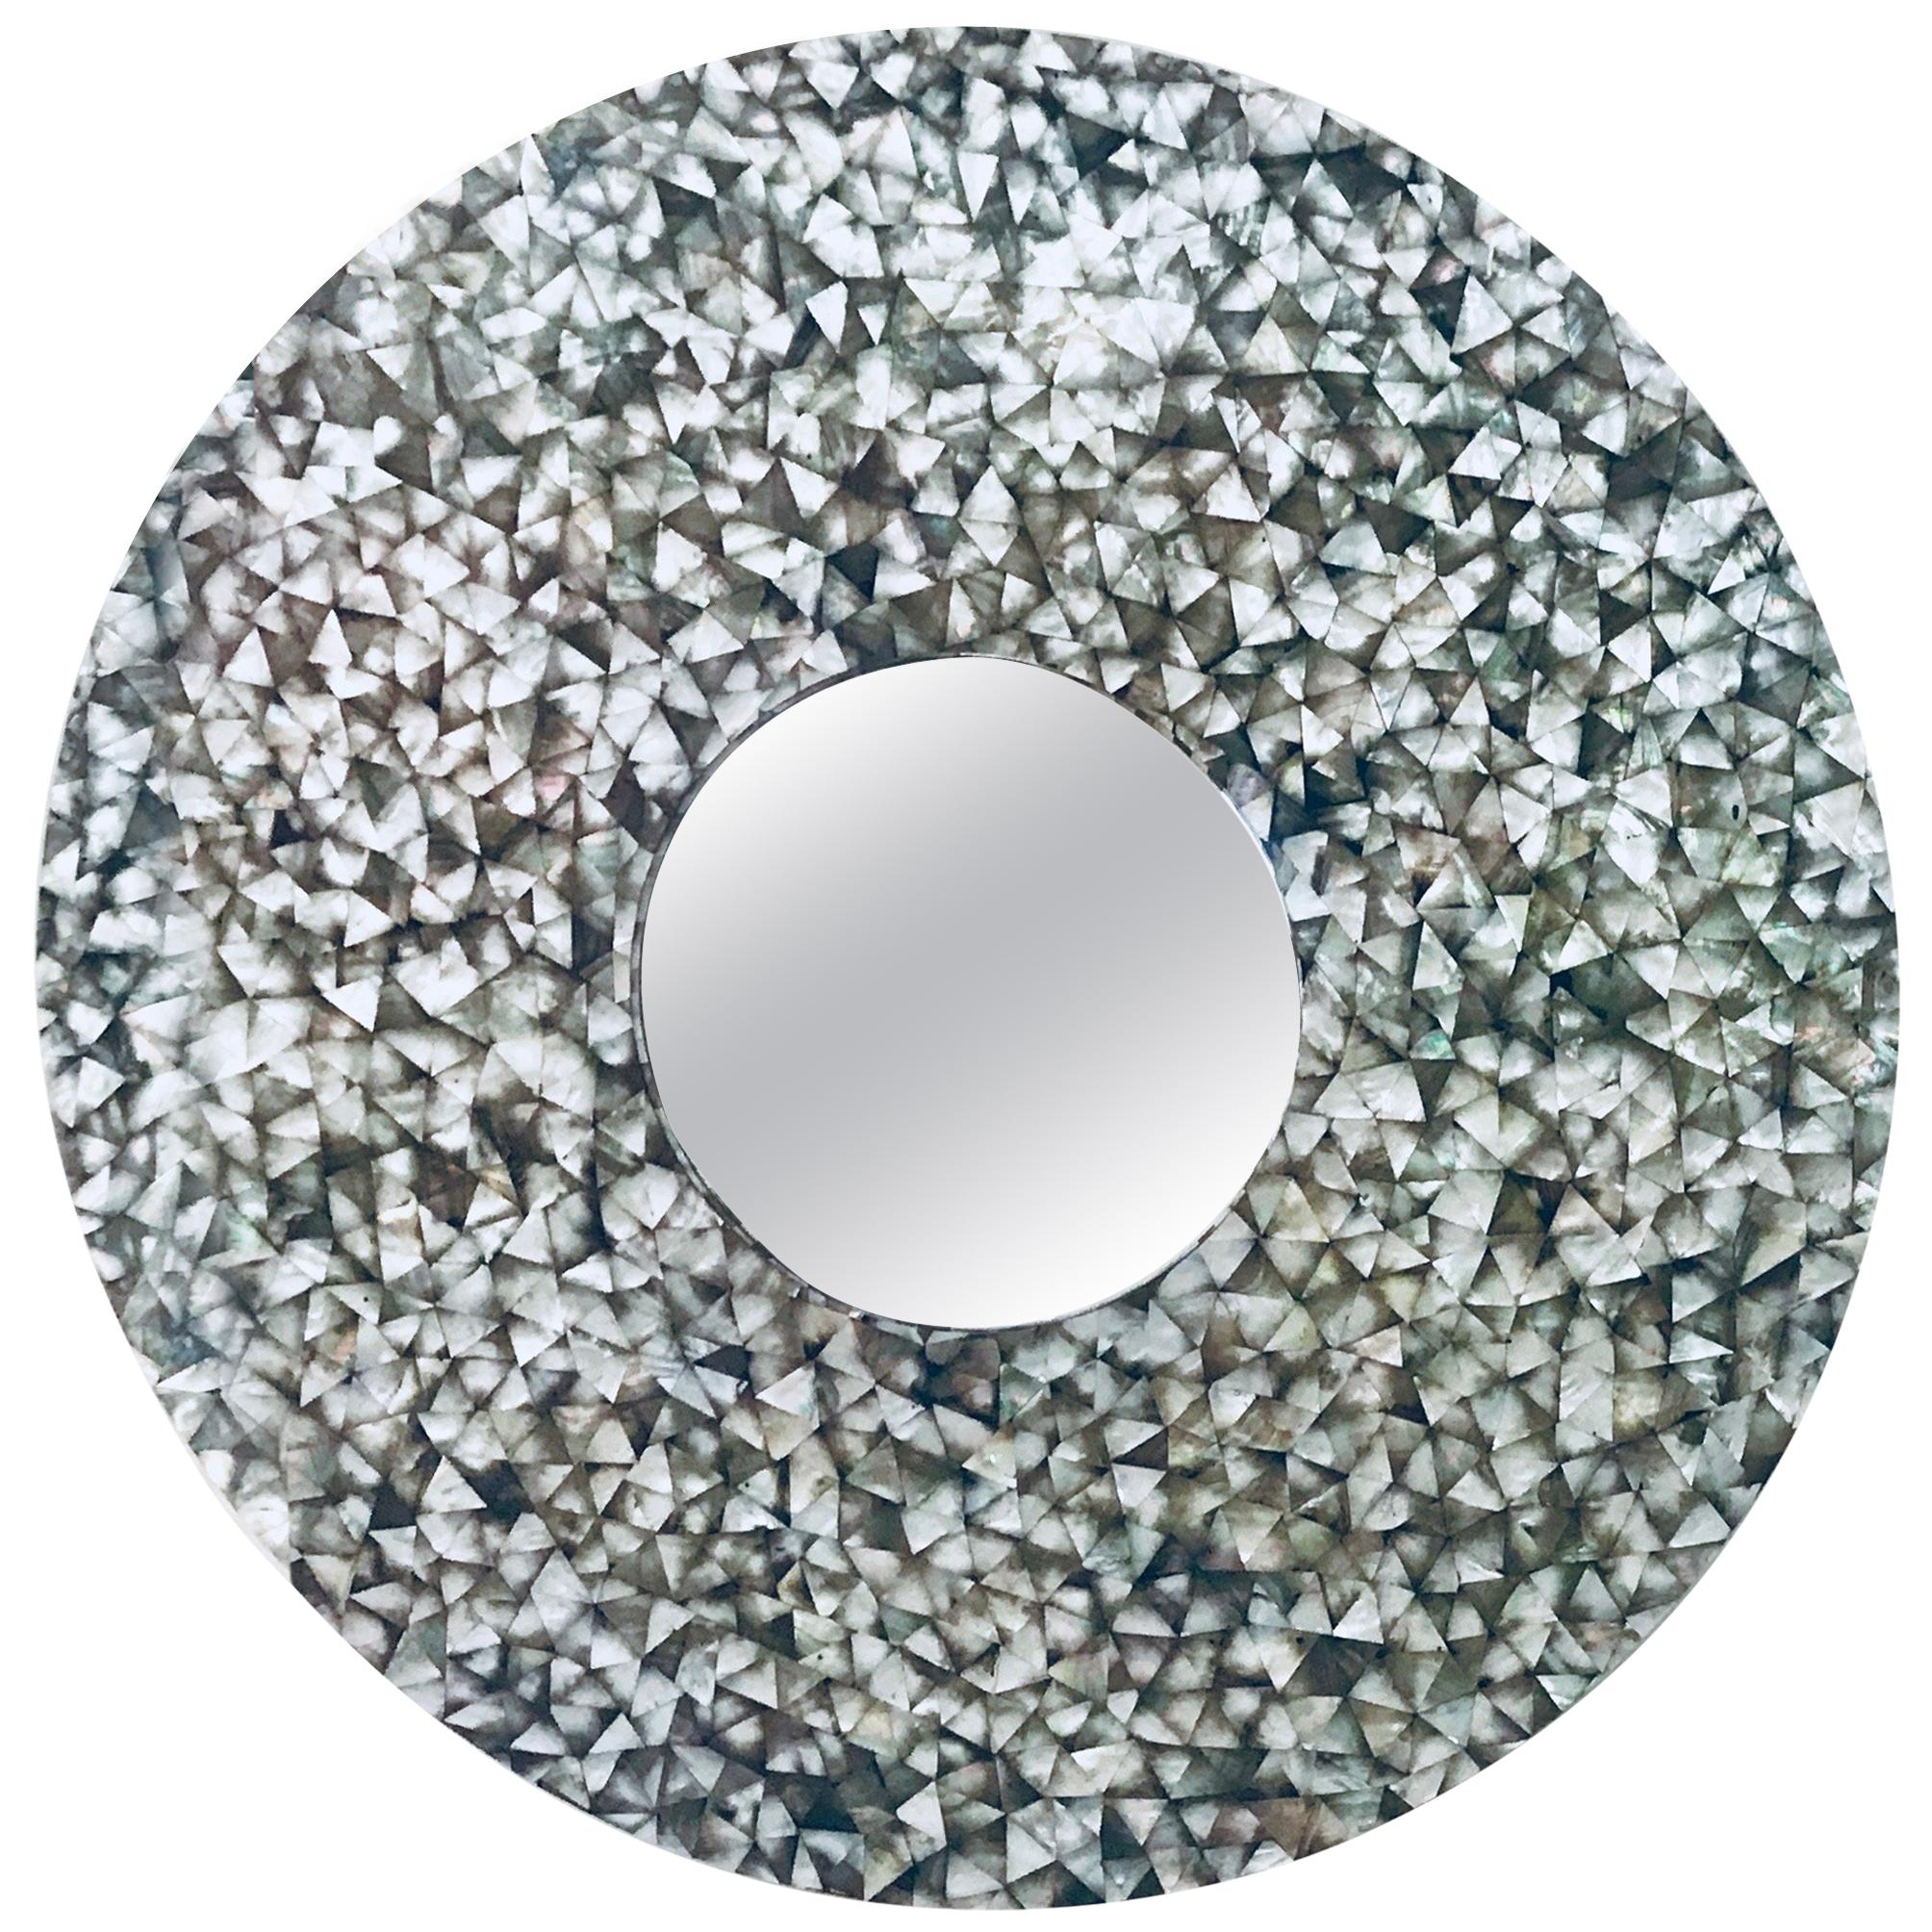 'Crystal Sea' Large Convex Round Mirror with Black Mother of Pearl Frame im Angebot